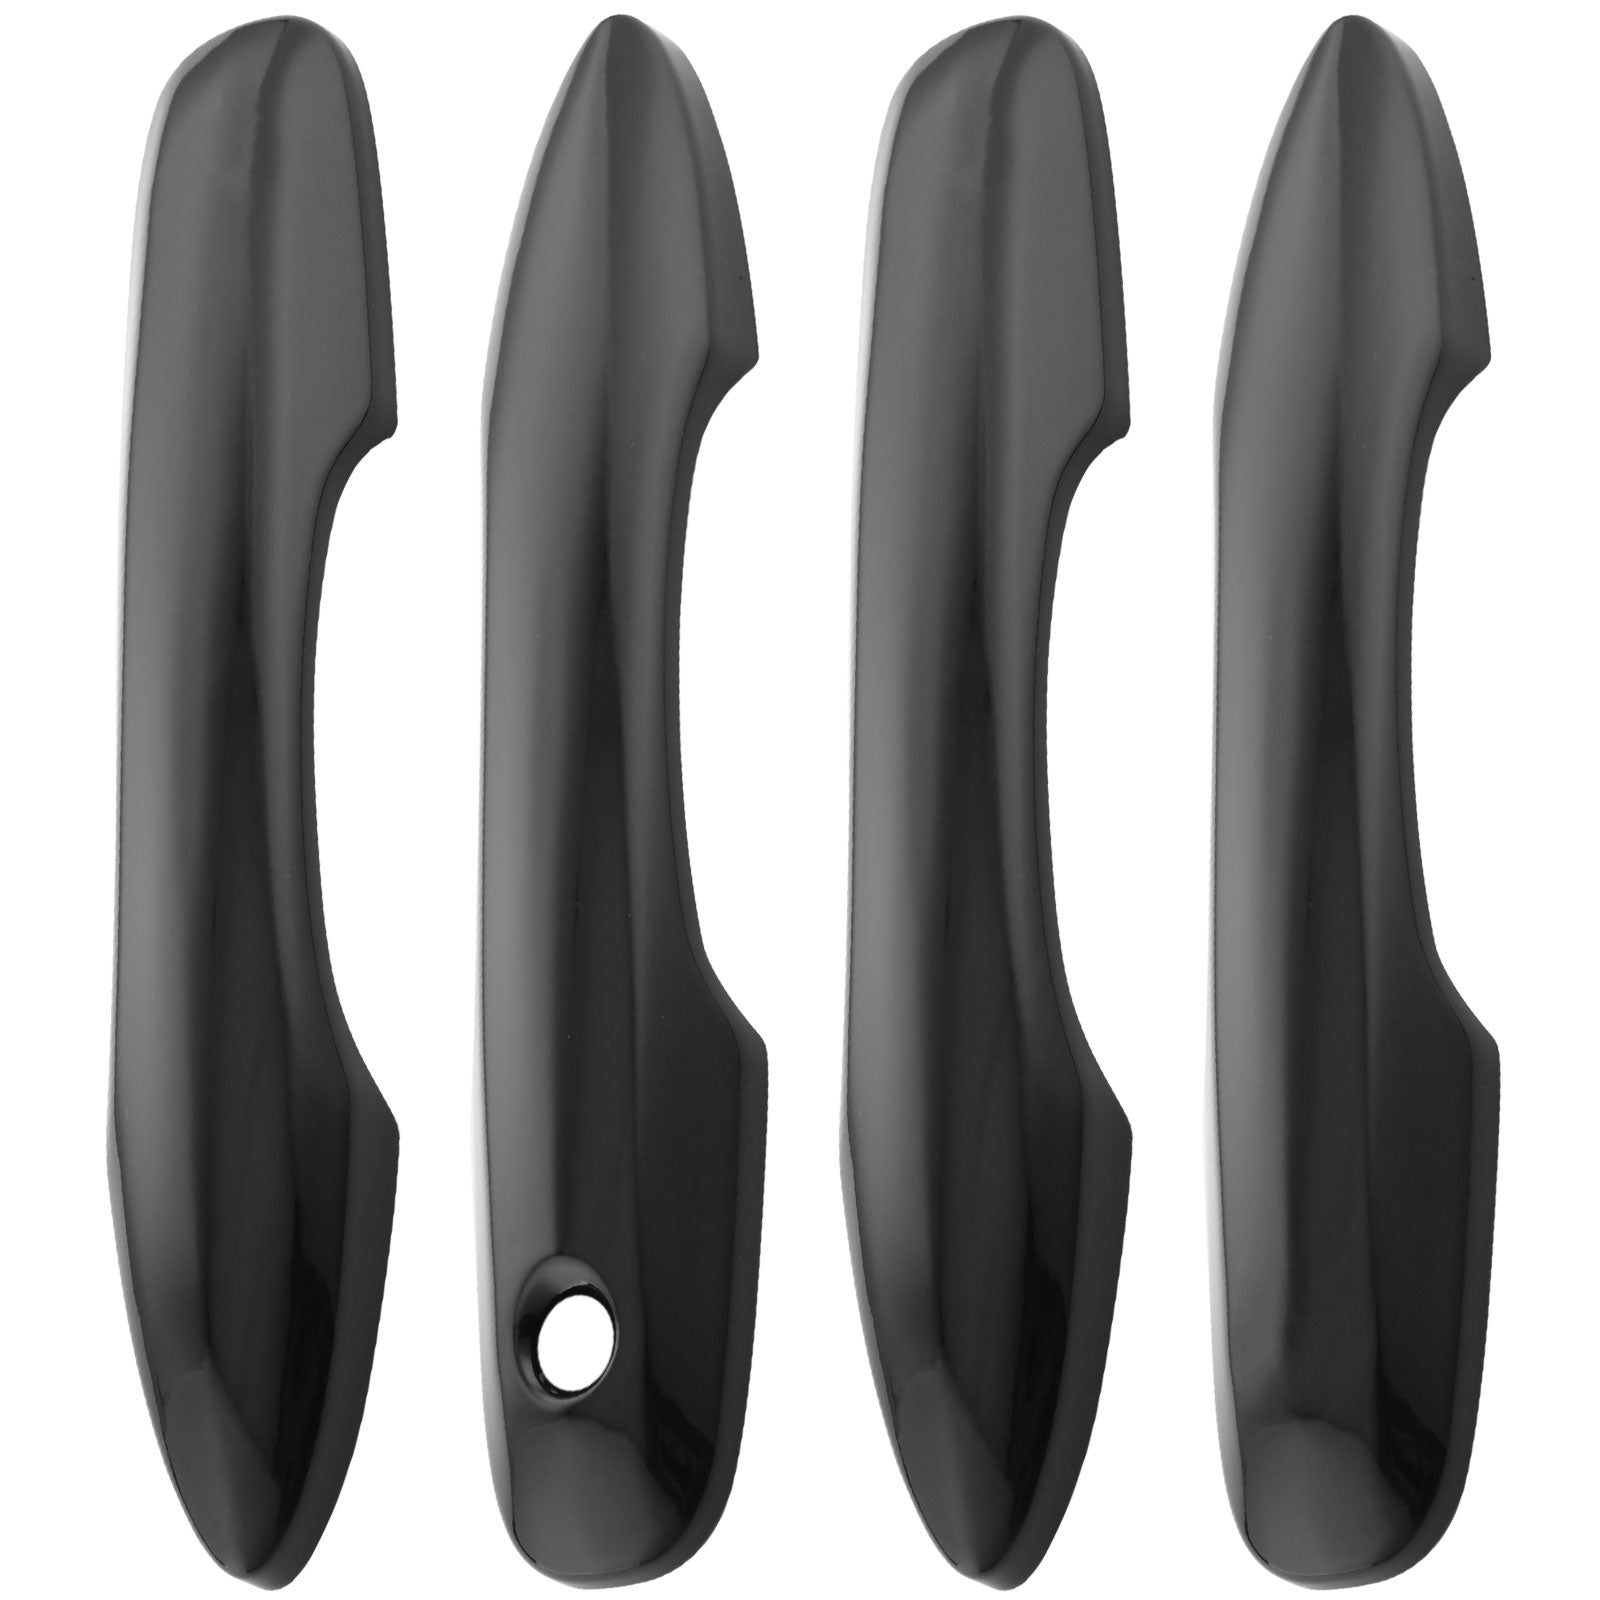 4Pcs Glossy Black Door Handle Covers W/O Keyhole Fits for Toyota Camry Corolla Prius Prime Car Door Handle MotorbyMotor